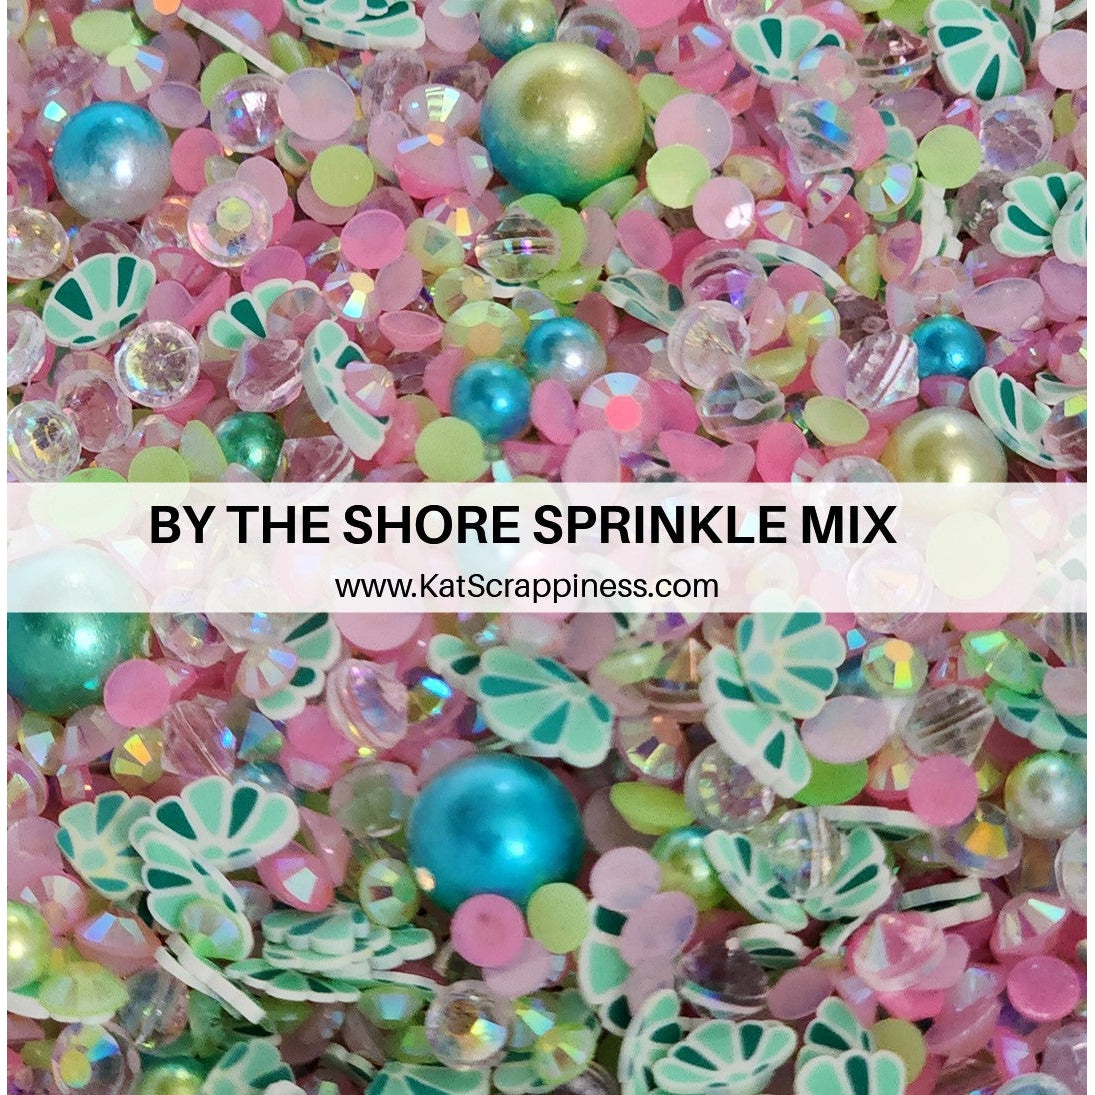 By the Shore Sprinkle Mix